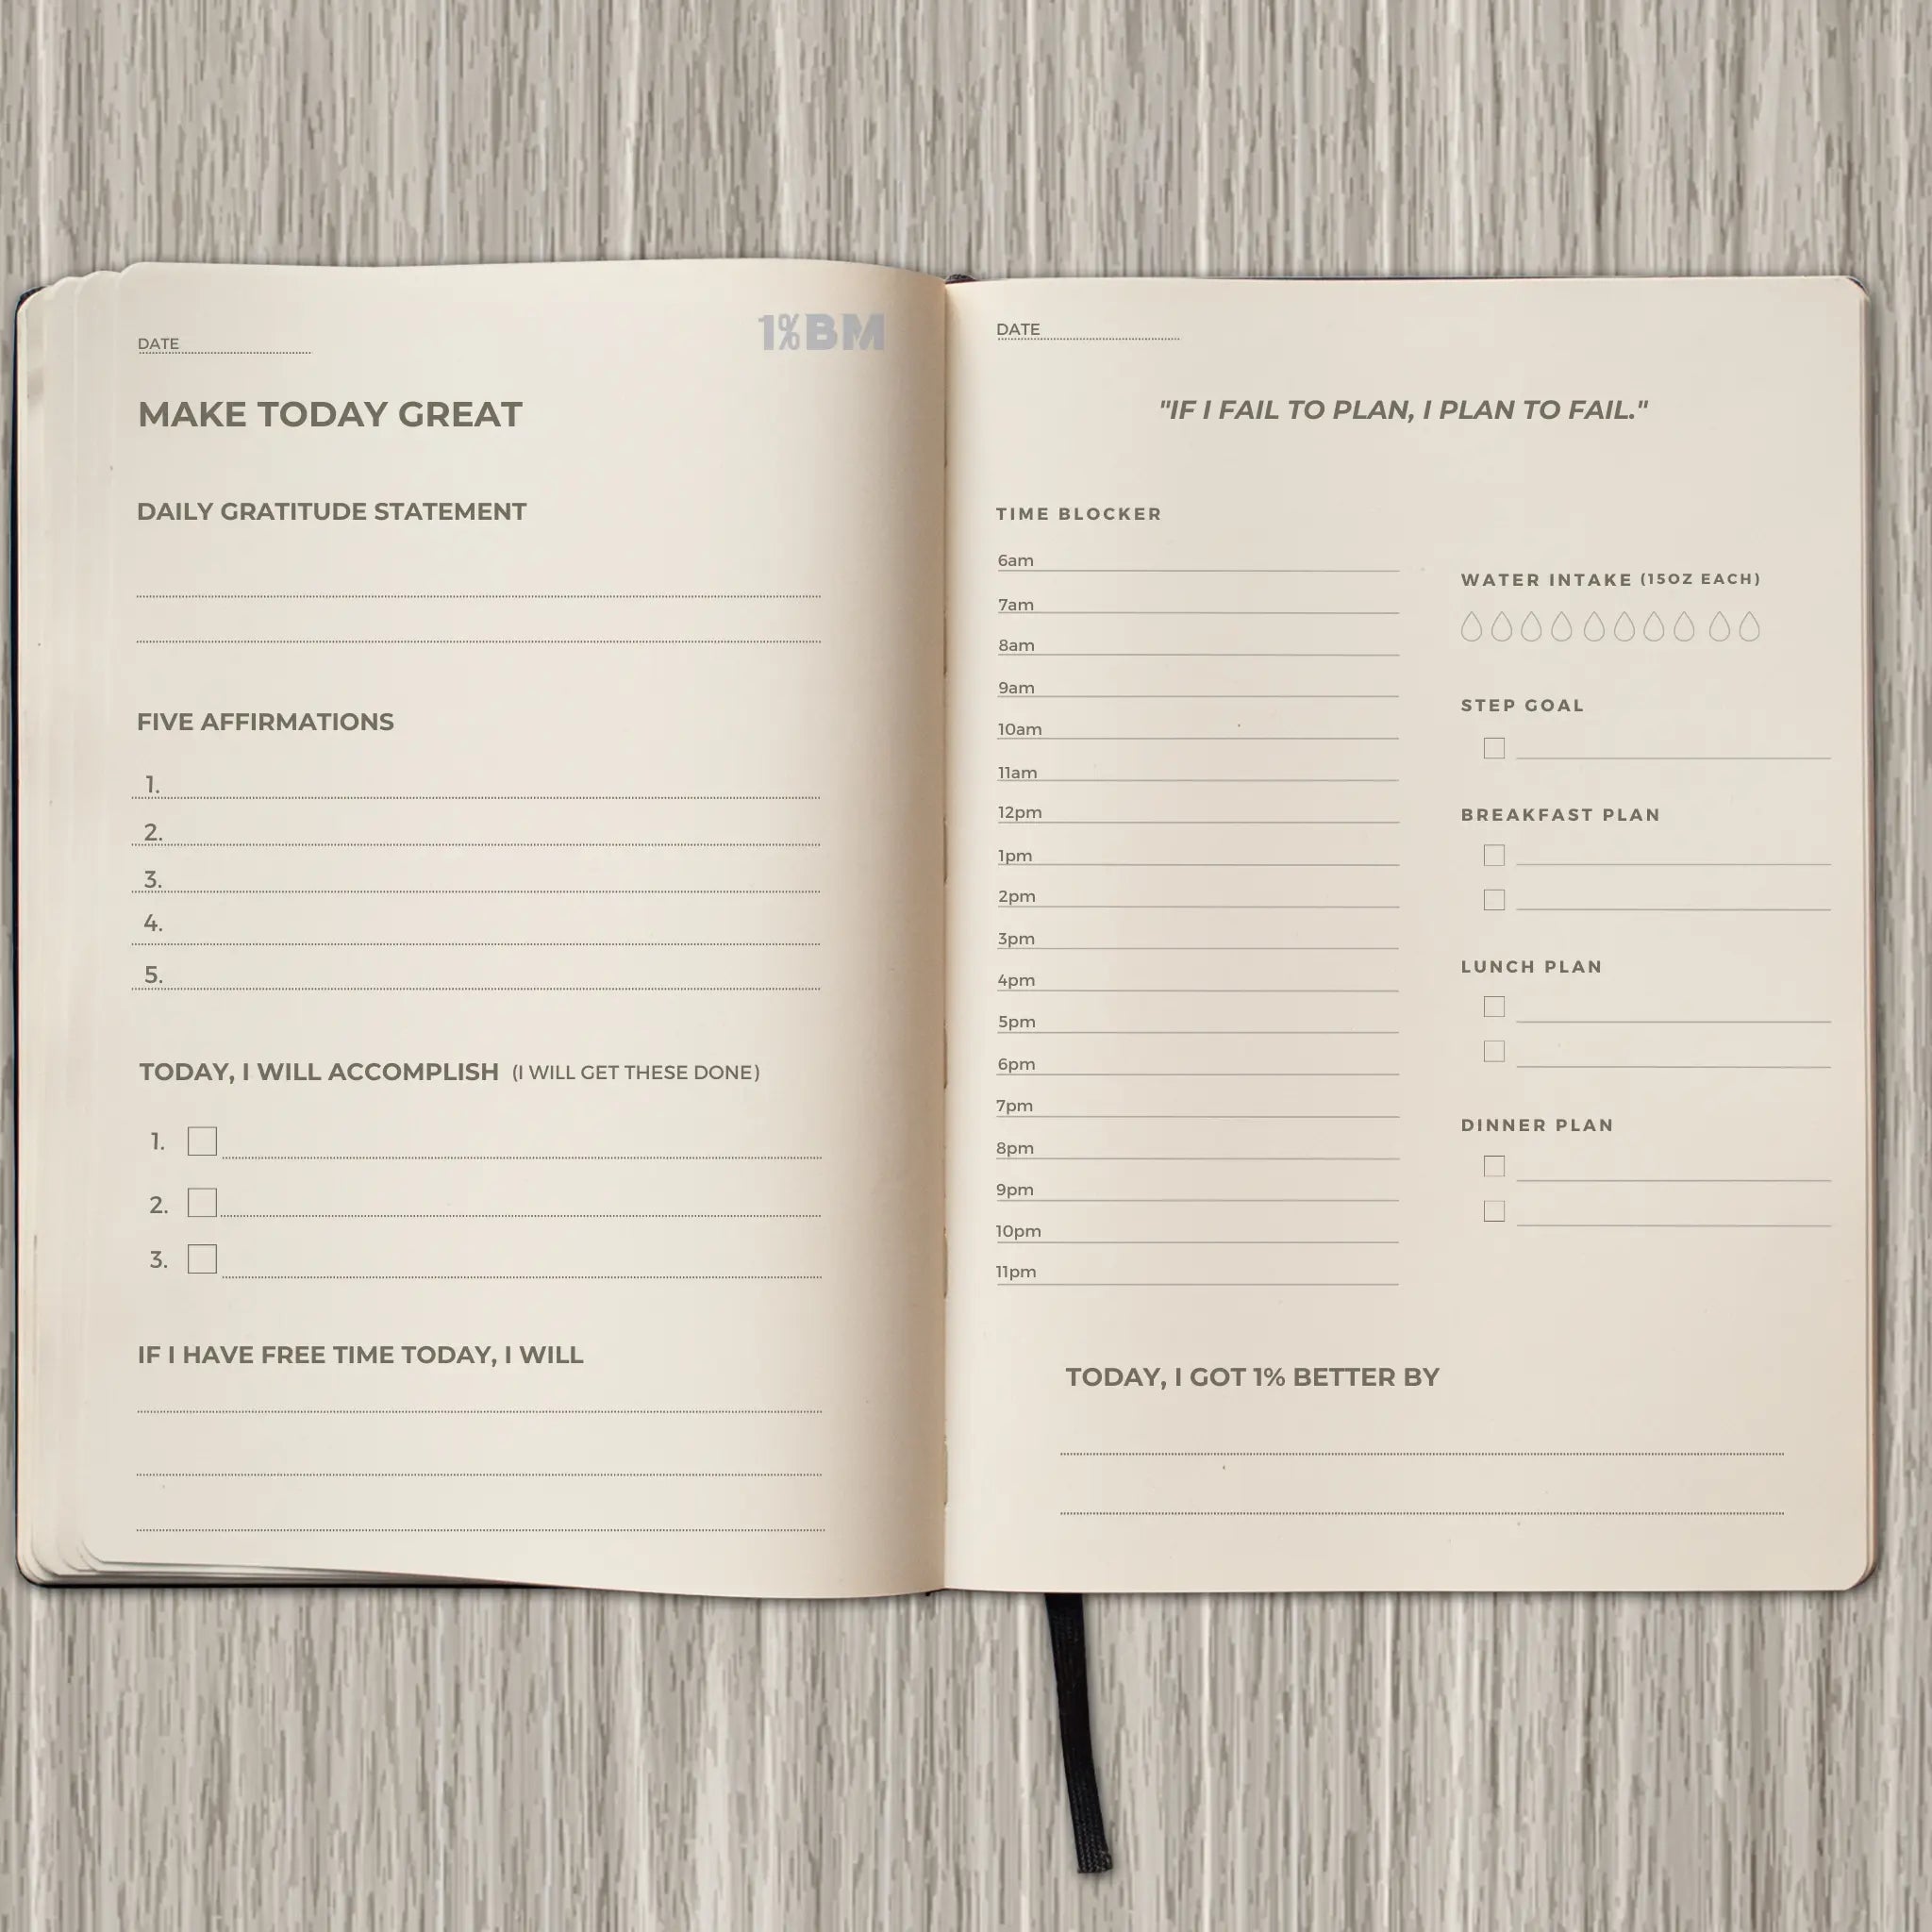 Productivity planner that lays the foundations of your health daily